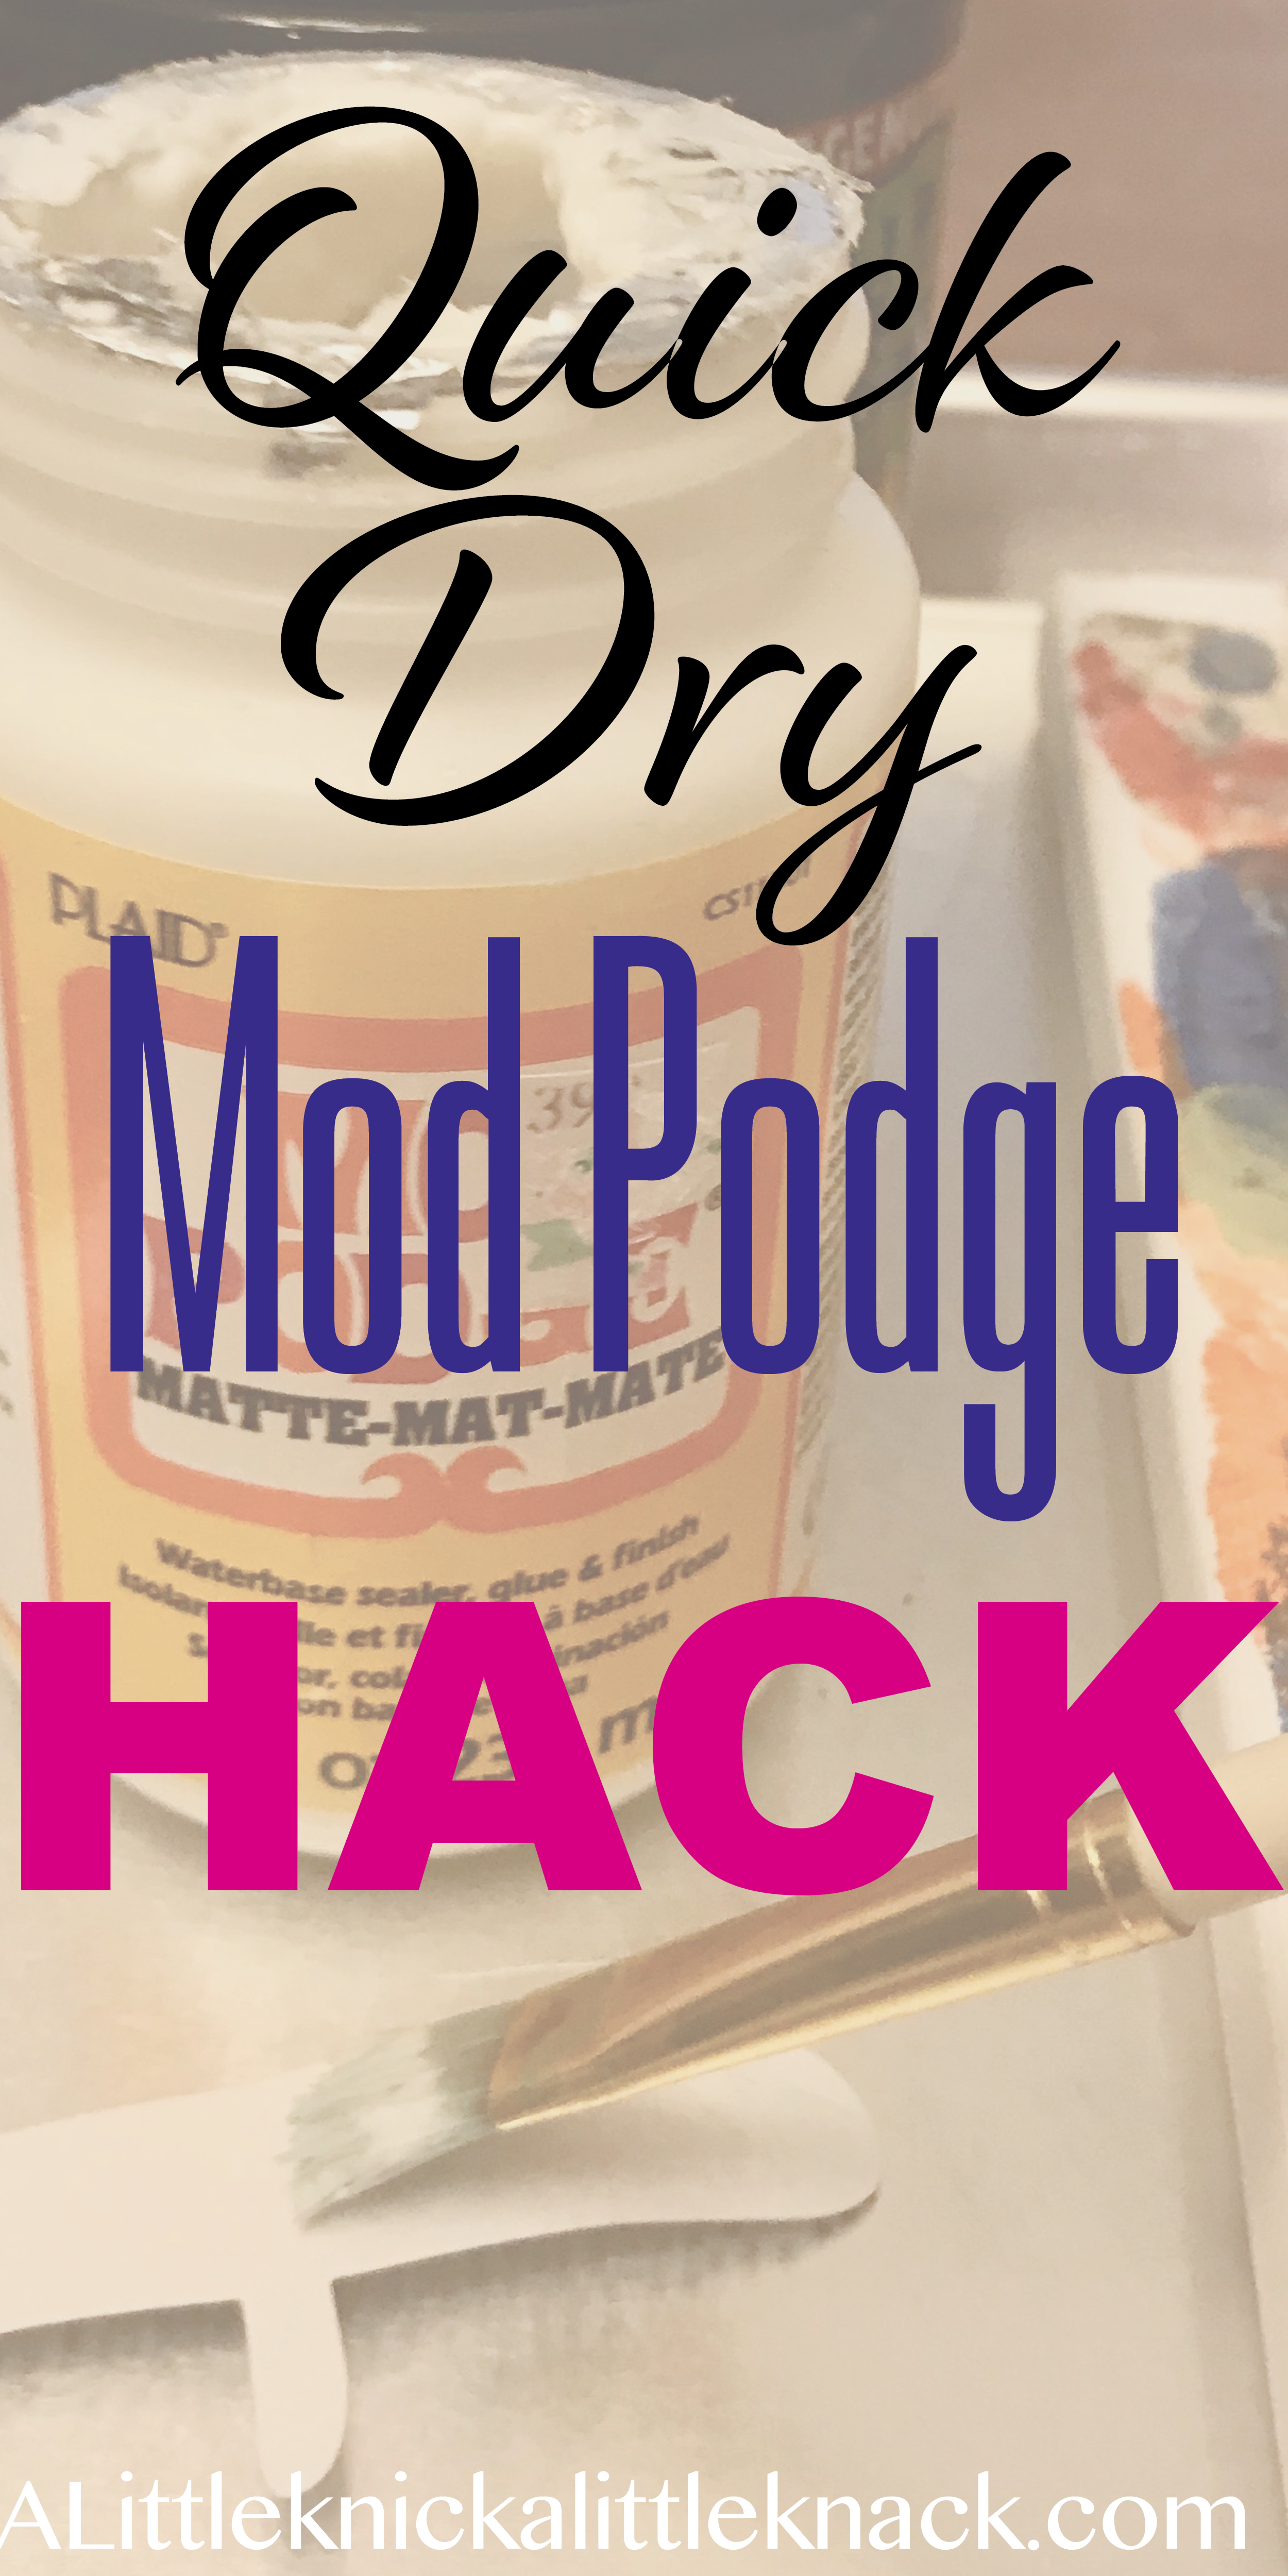 Are mod podge dimensional magic supposed to dry this way? : r/crafts